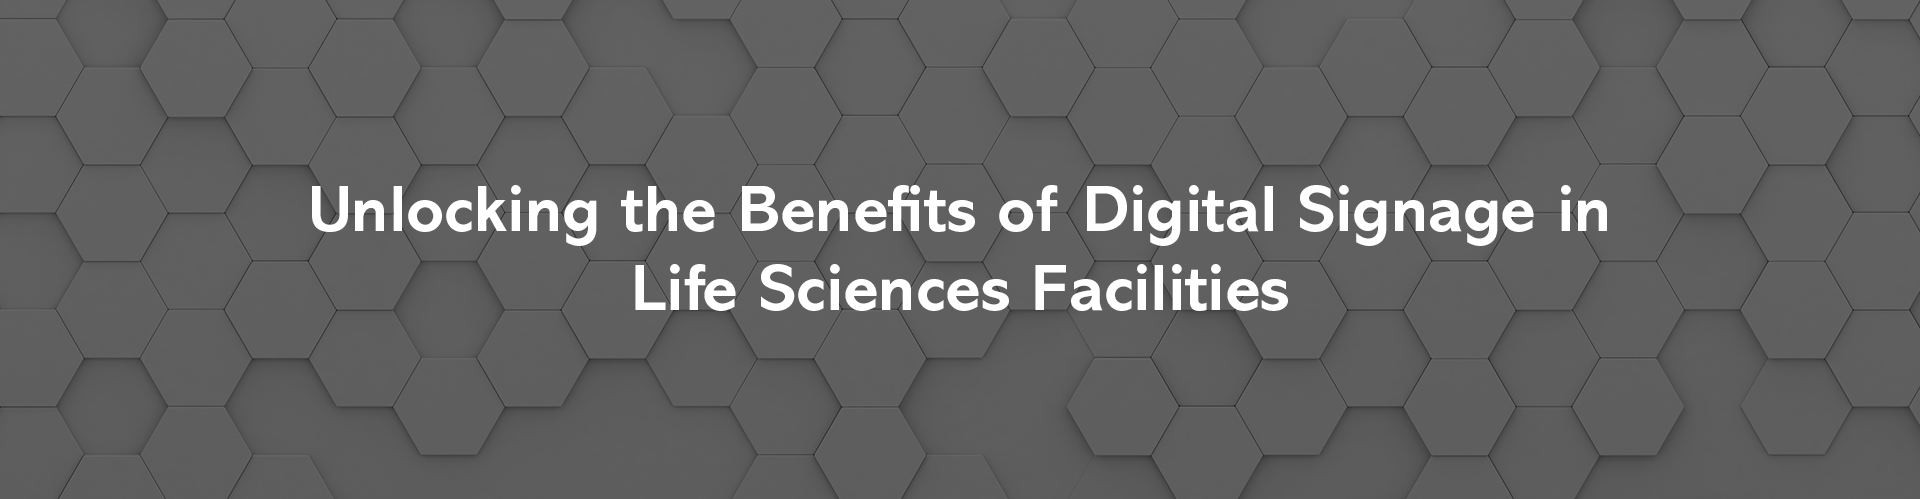 Unlocking the Benefits of Digital Signage in Life Sciences Facilities